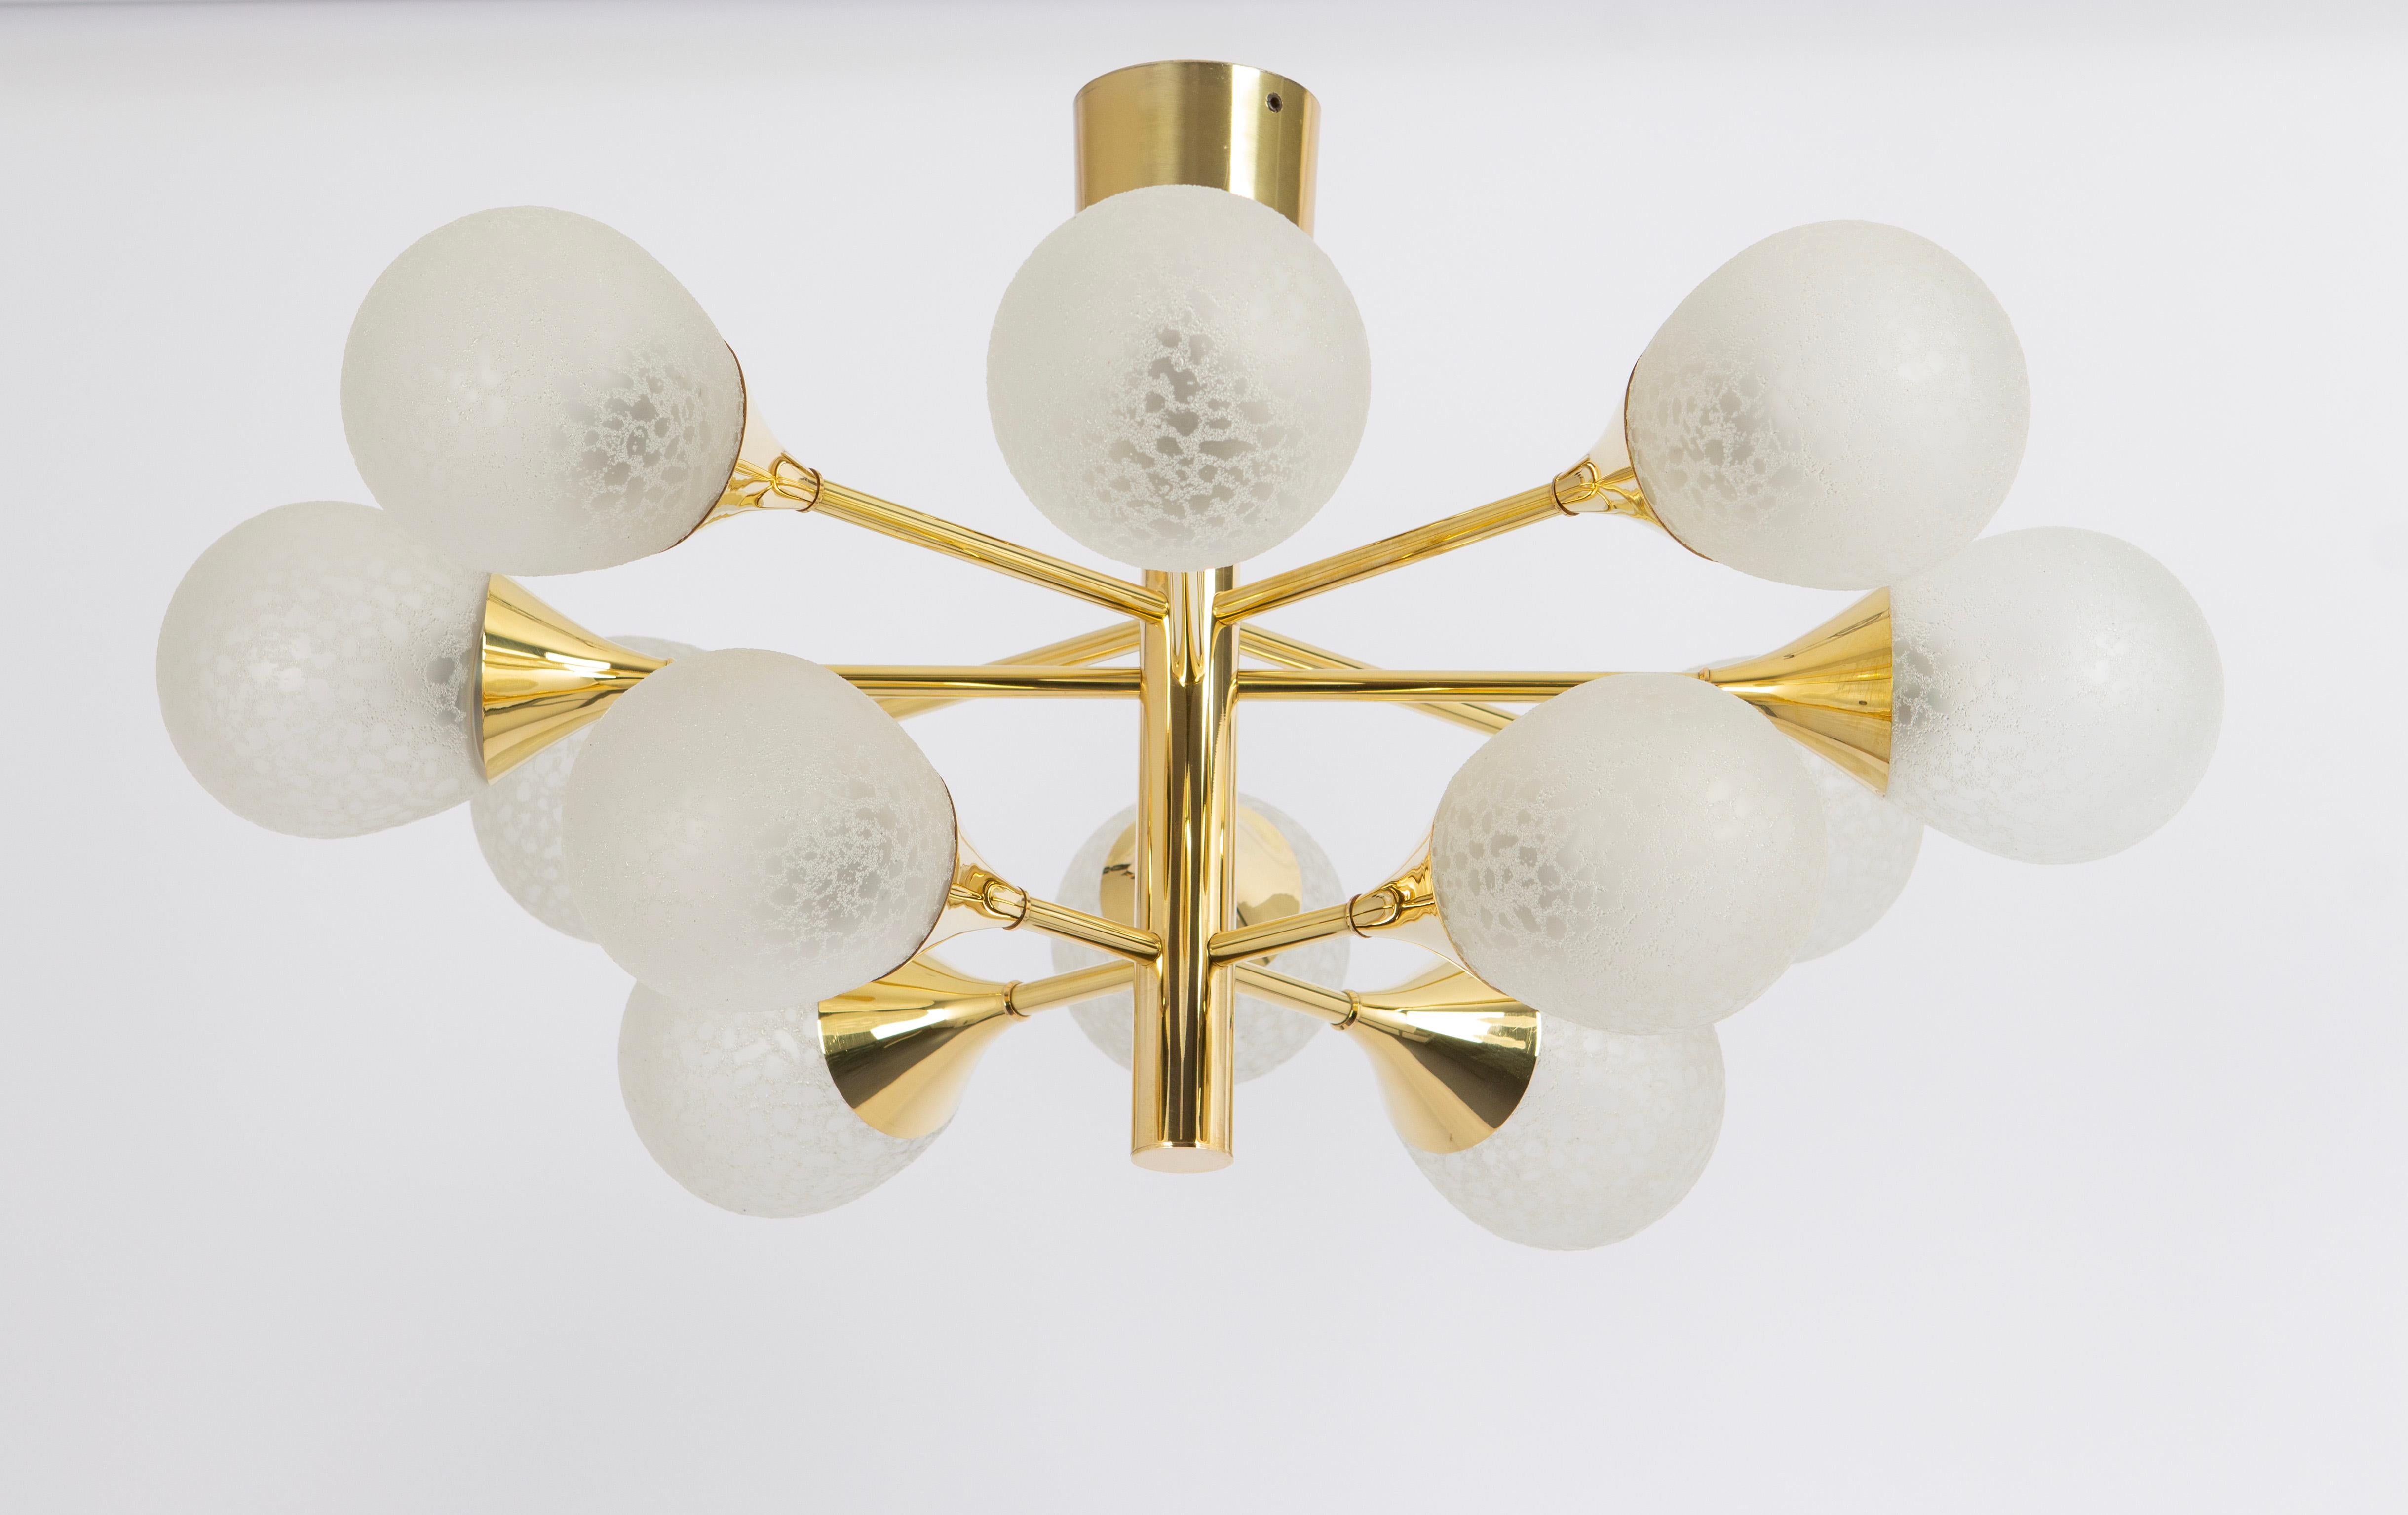 Stunning Sputnik brass chandelier with 12 glass globes by Kaiser Leuchten, Germany, 1970s.
High quality and in very good condition. Cleaned, well-wired, and ready to use. 

The fixture requires 12 x E14 small bulbs with 40W max each.
Light bulbs are